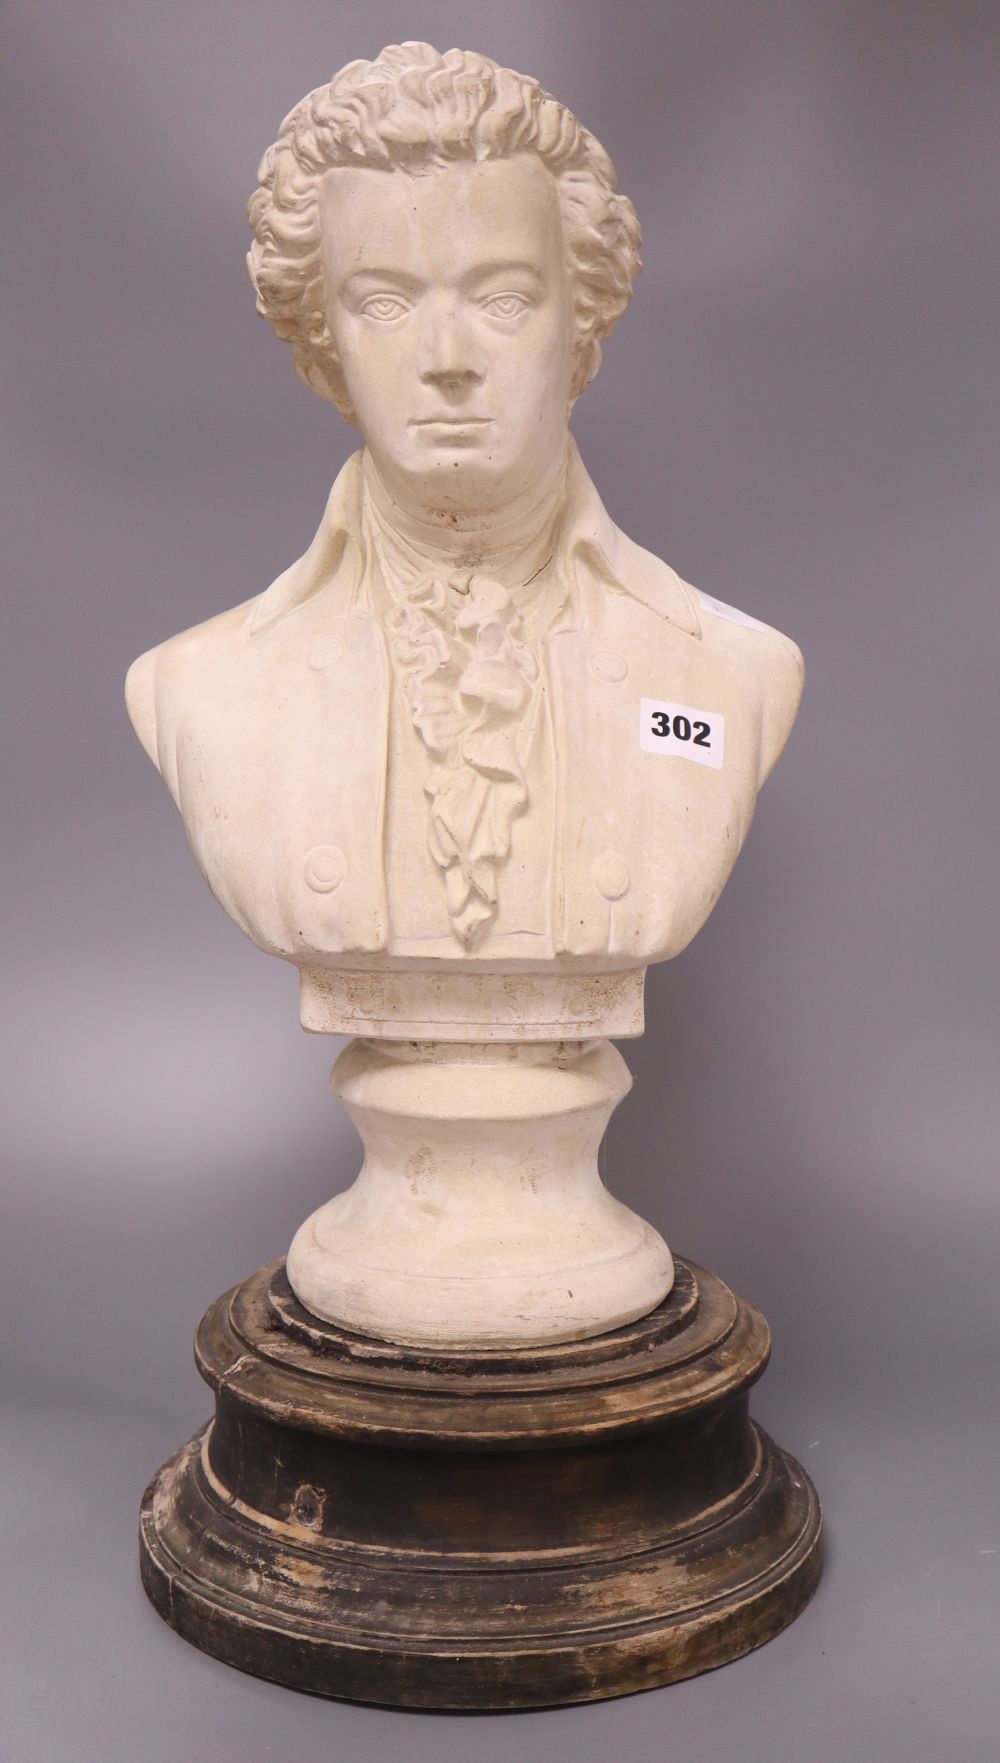 A reconstituted bust of Mozart, height 44cm excl. stand